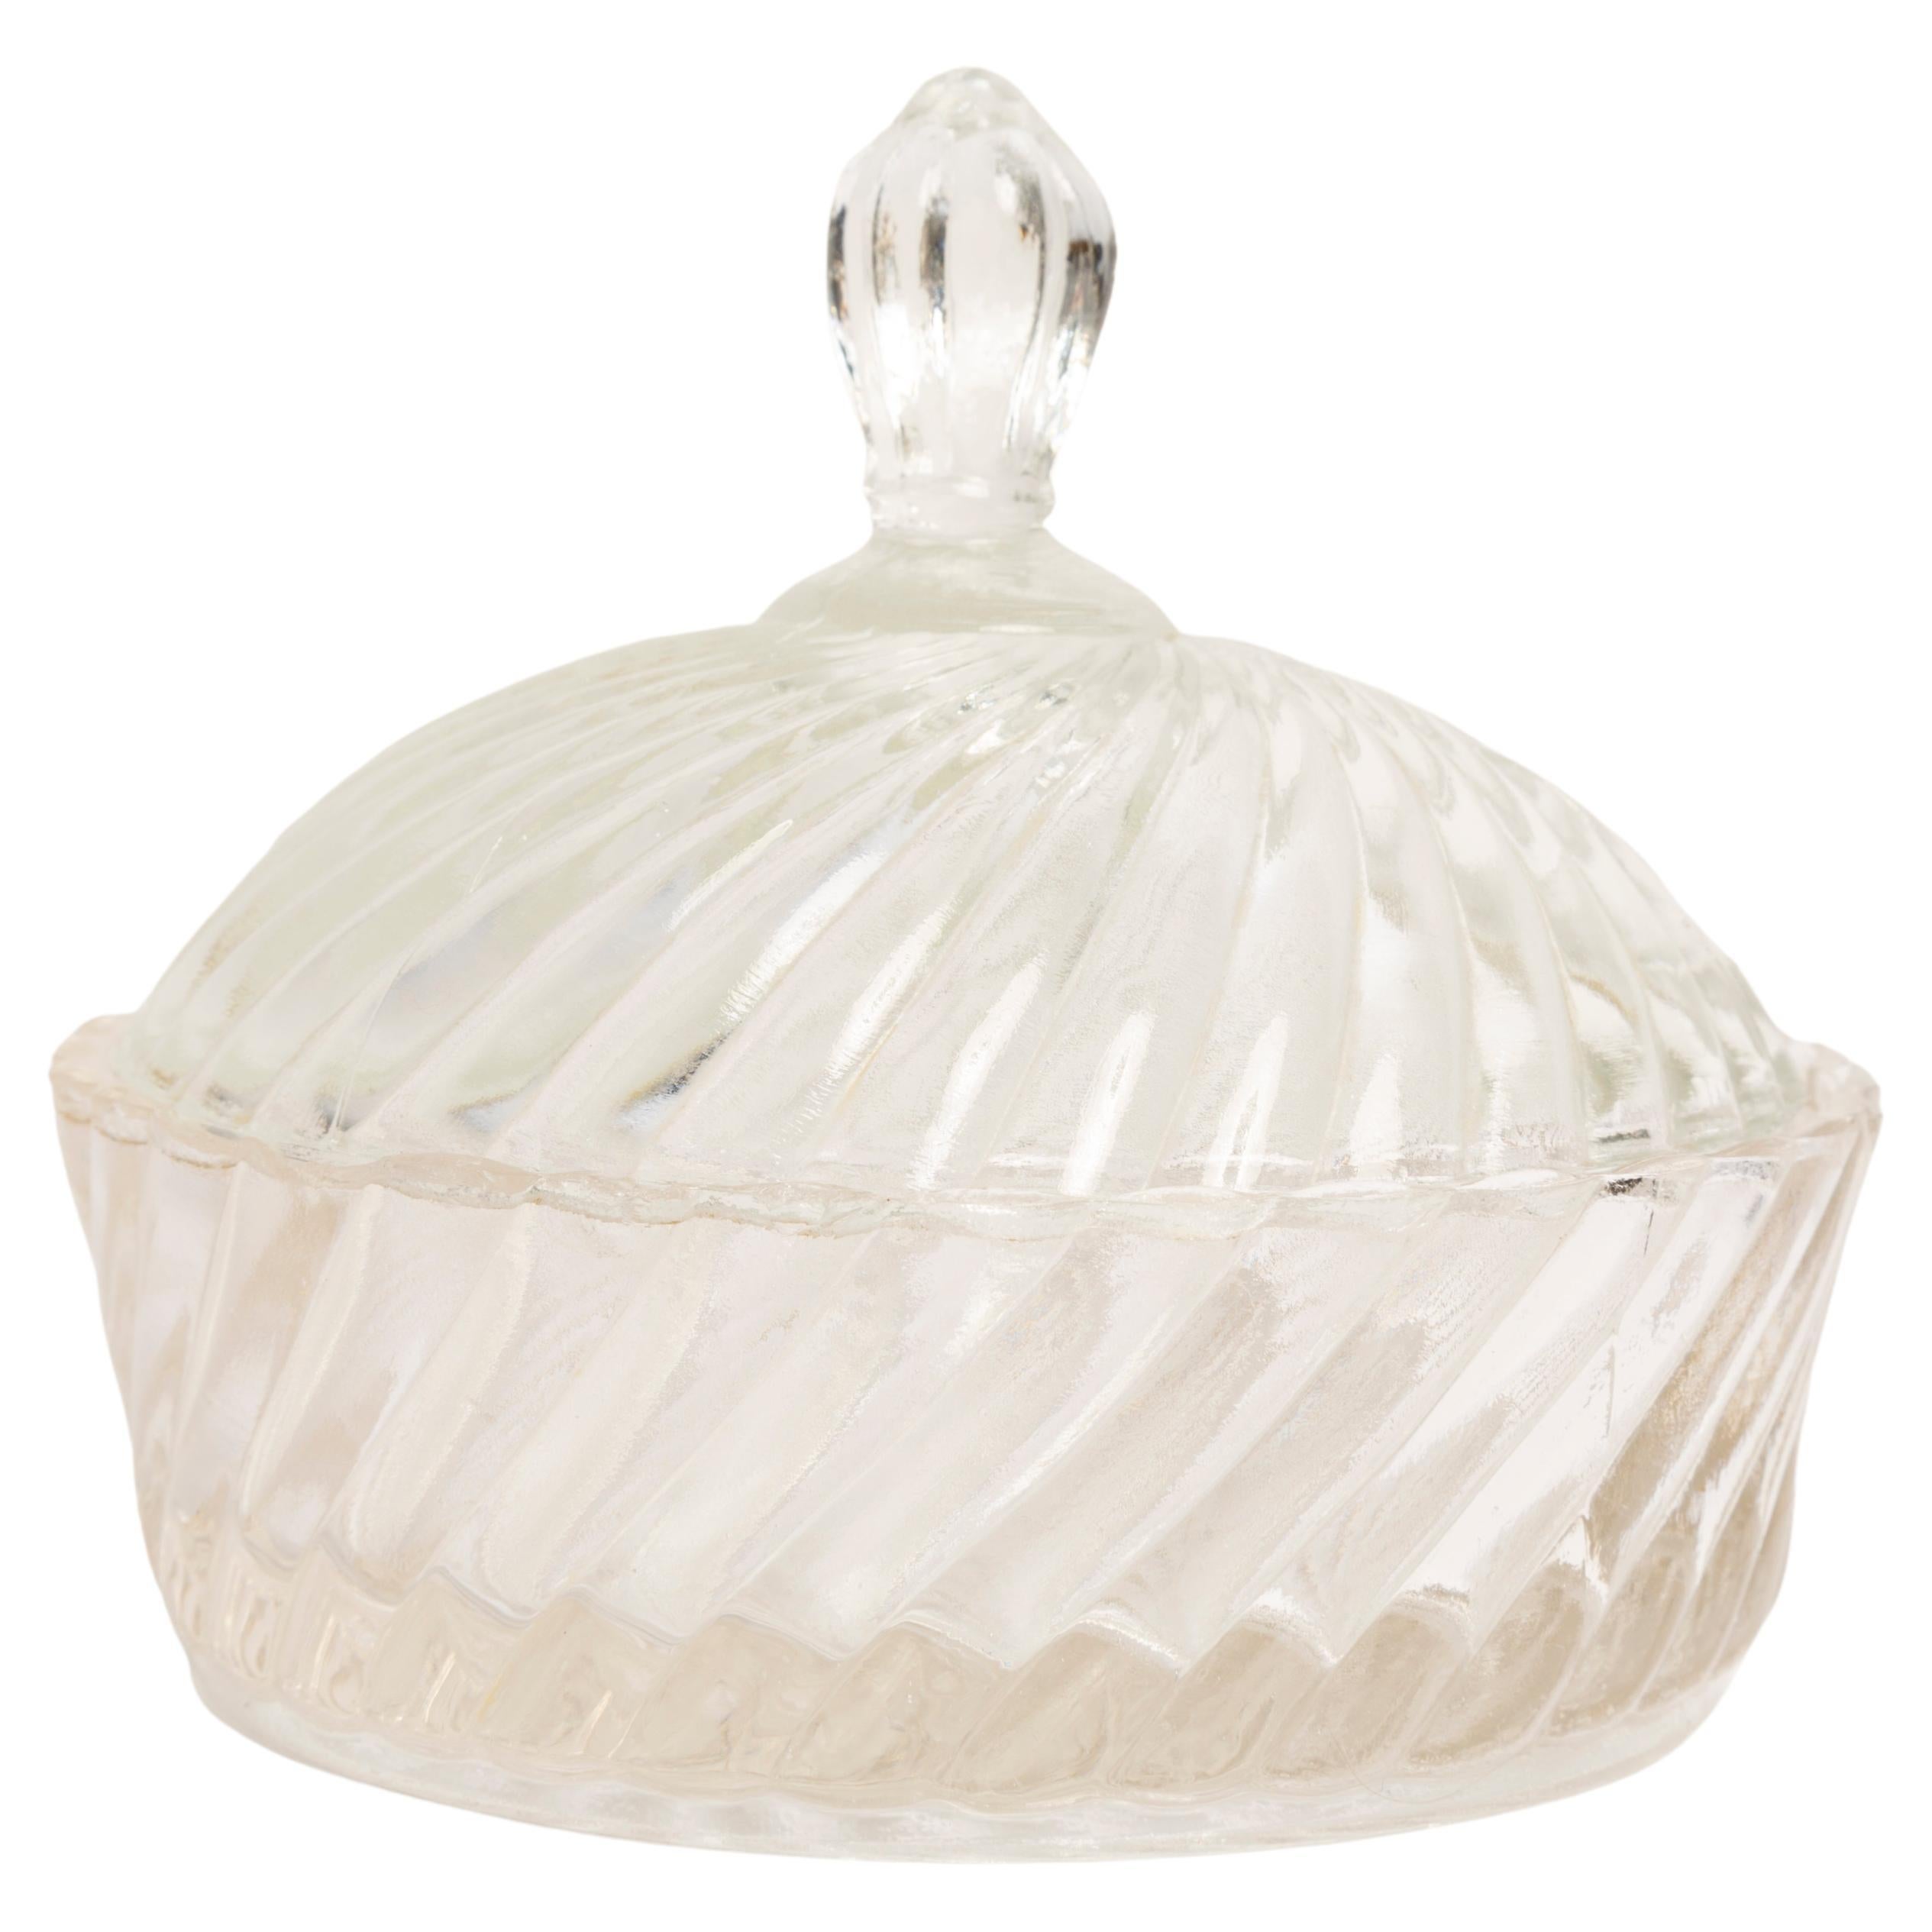 Midcentury Vintage Transparent Crystal Glass Sugar Bowl, Italy, 1960s For Sale